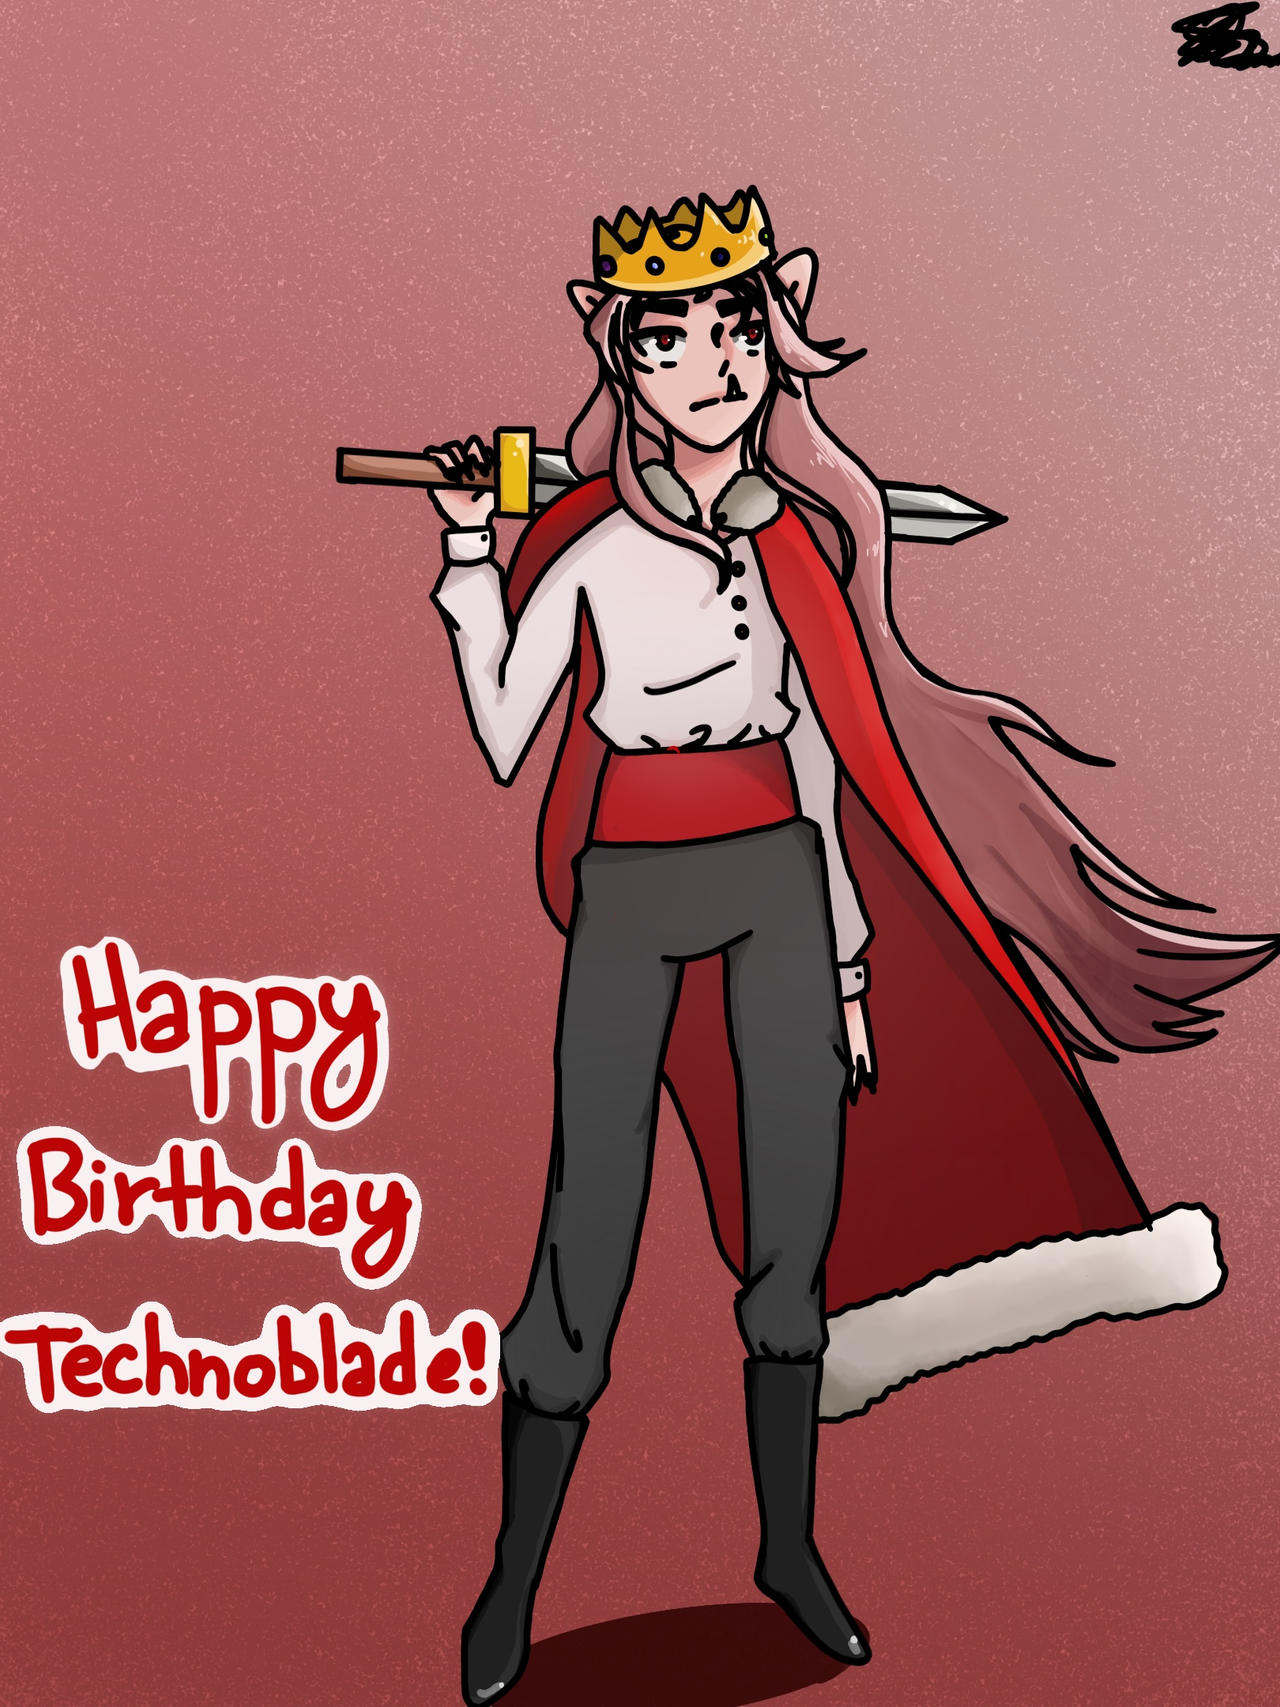 What Happened to Technoblade? Did Technoblade Die on His Birthday